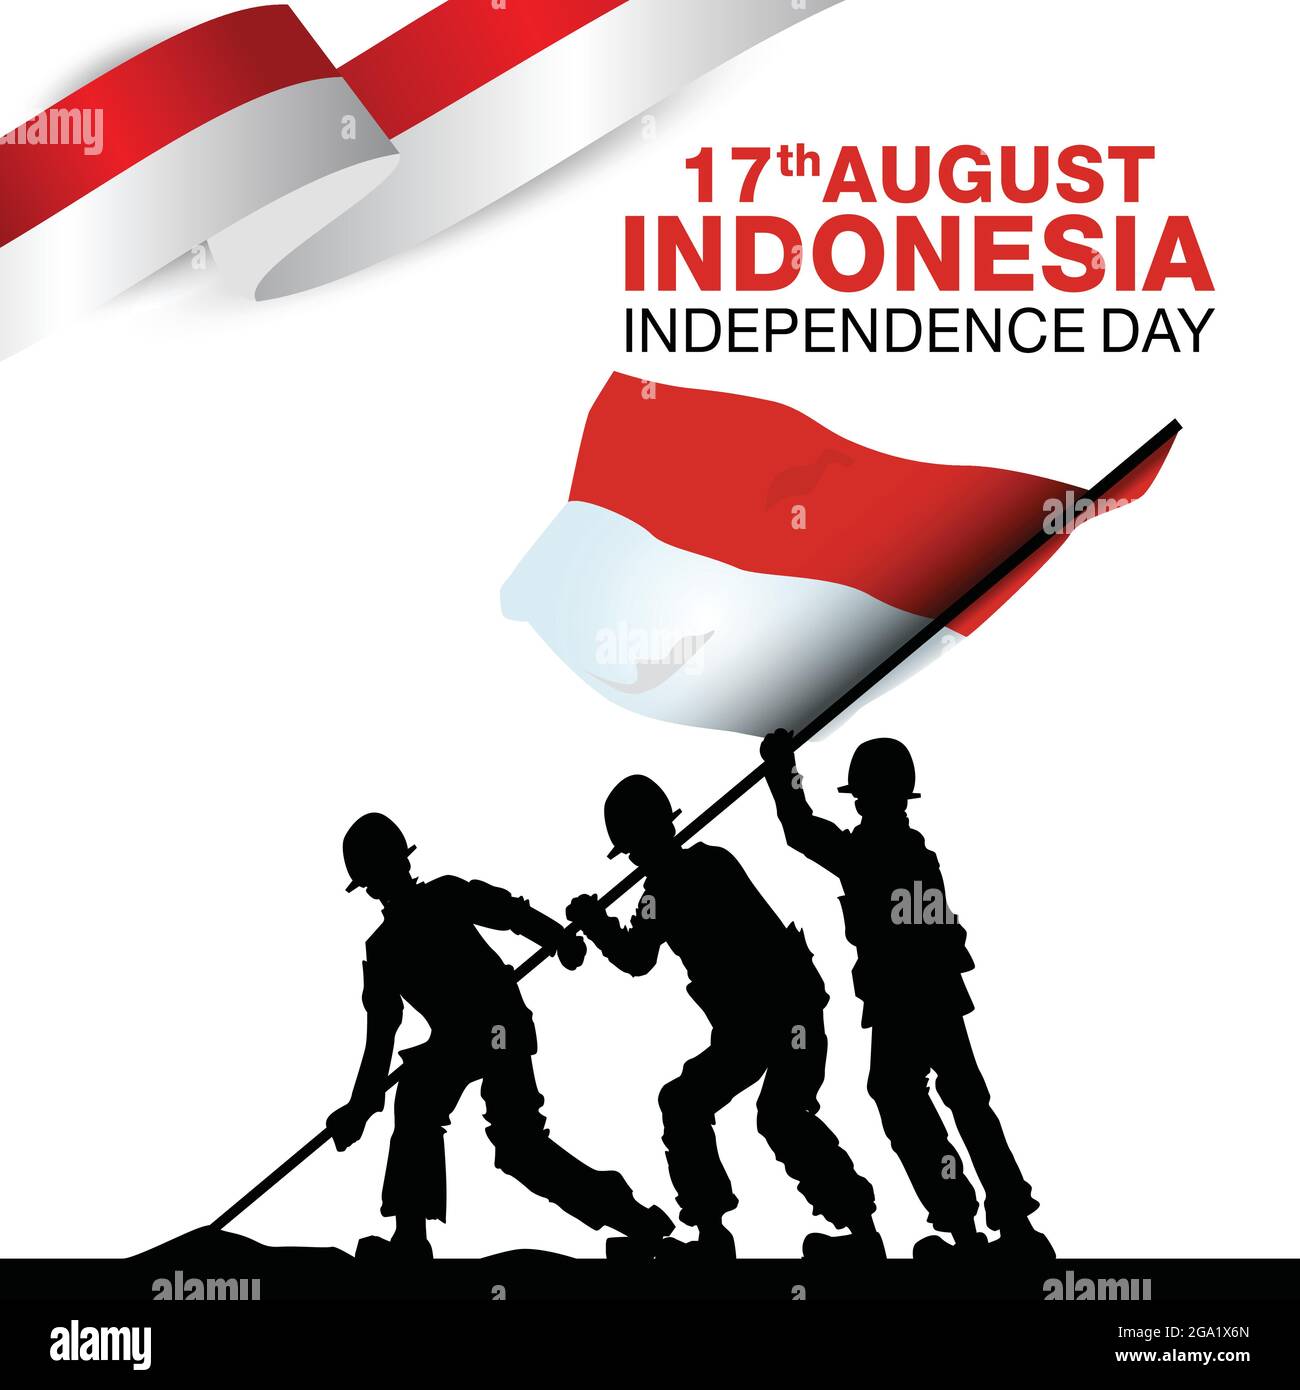 happy independence day Indonesia. Vector Template Design Illustration. silhouette soldiers raising with flag Stock Vector